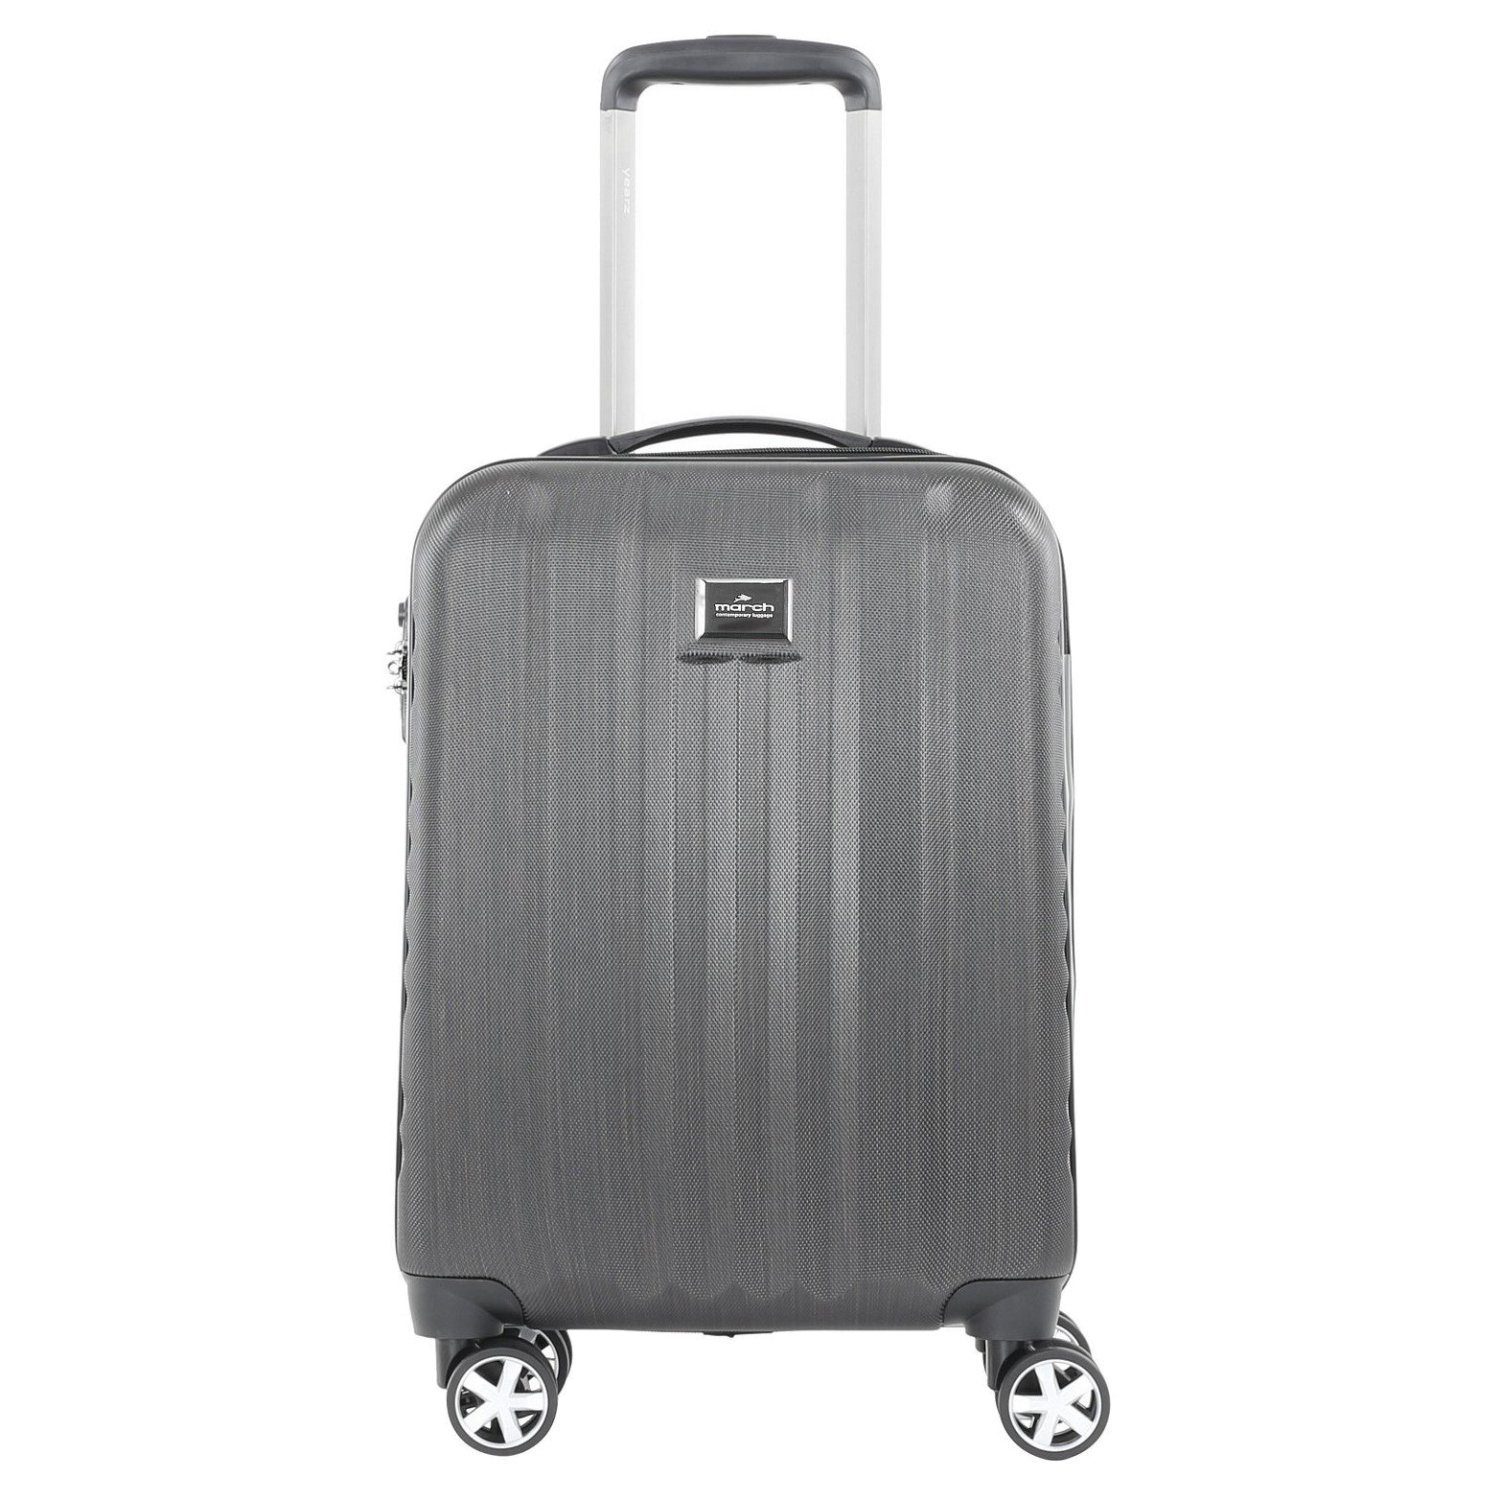 March15 Trading Trolley Fly brushed - 4-Rollen-Kabinentrolley S 55 cm, 4 Rollen bronze brushed